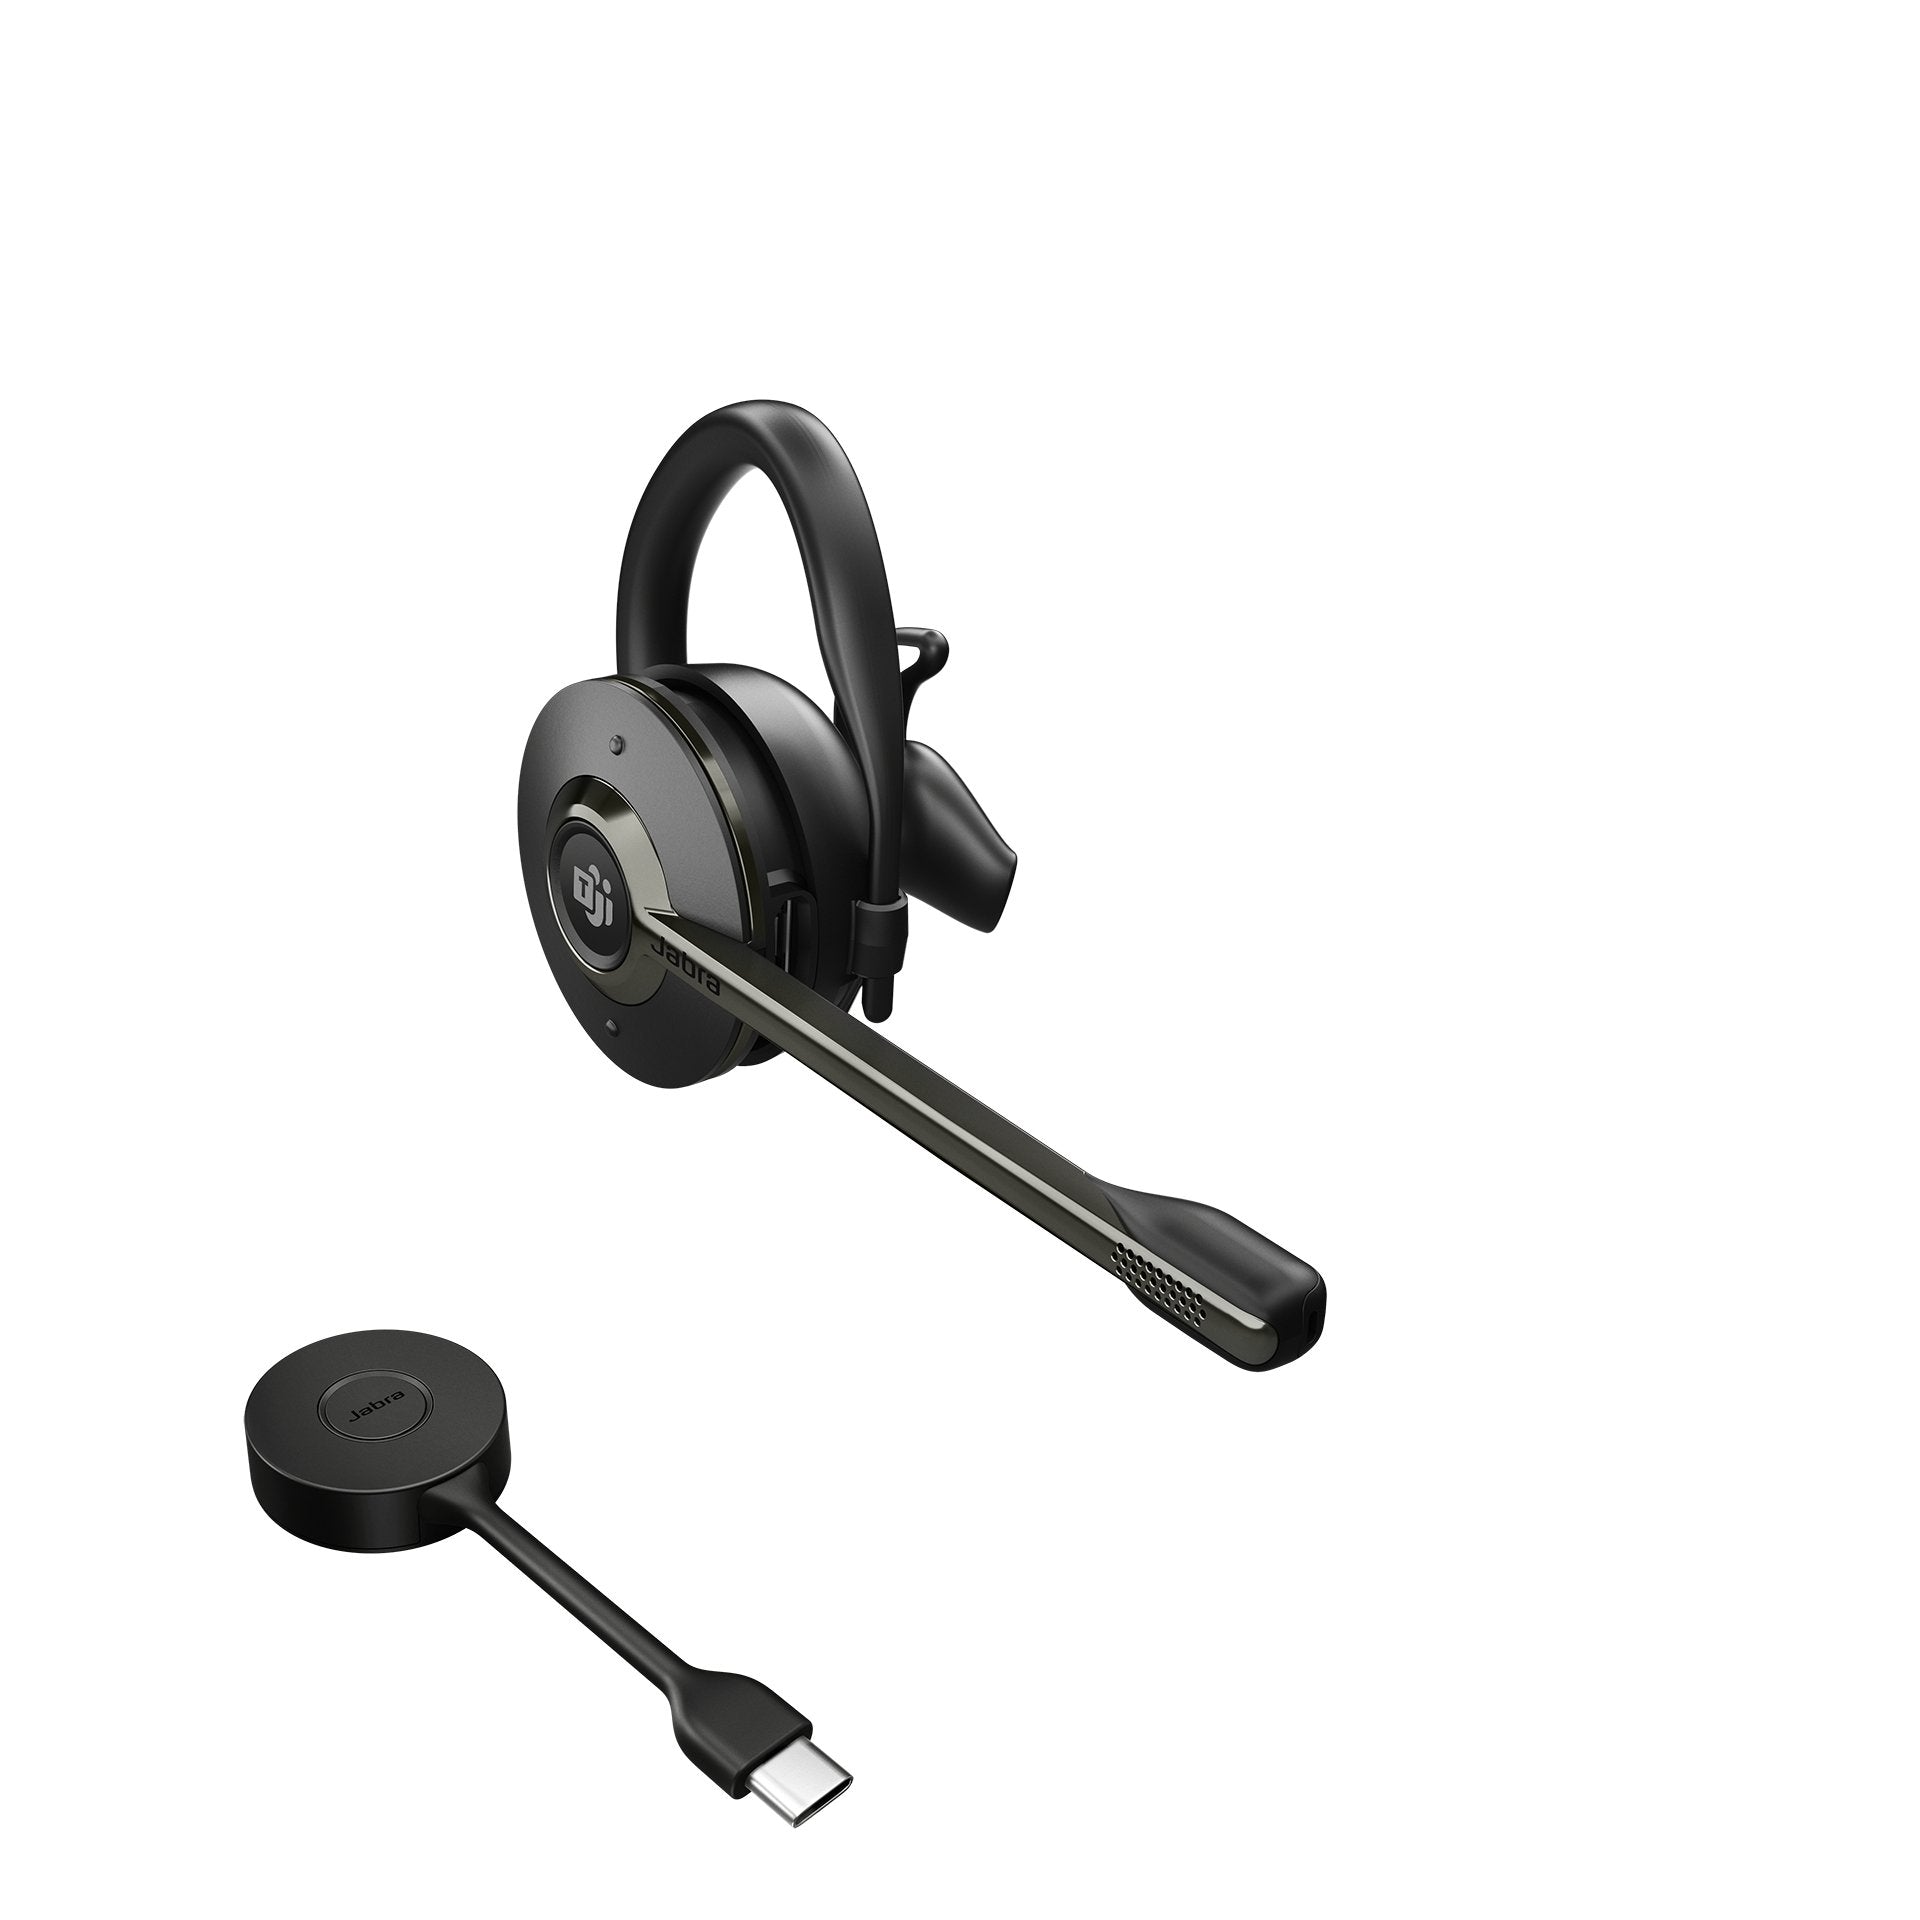 REVIEW: Jabra Engage 75 Convertible - The best wireless headset?